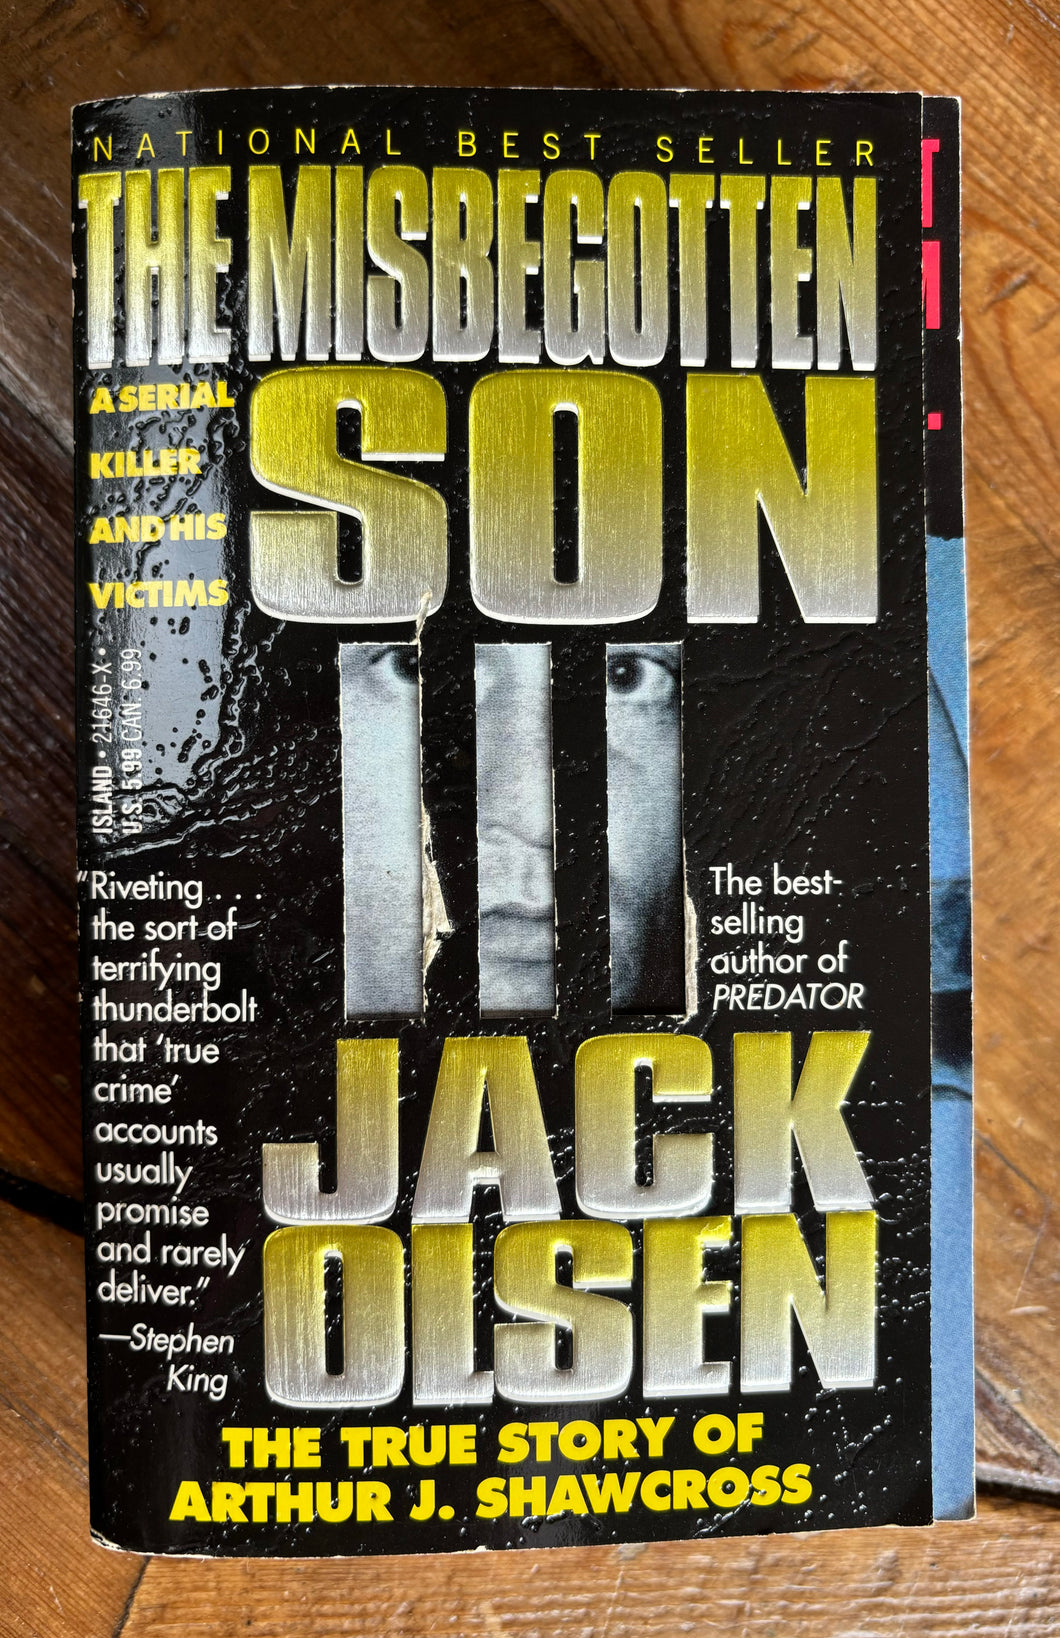 The Misbegotten Son: A Serial Killer and His Victims